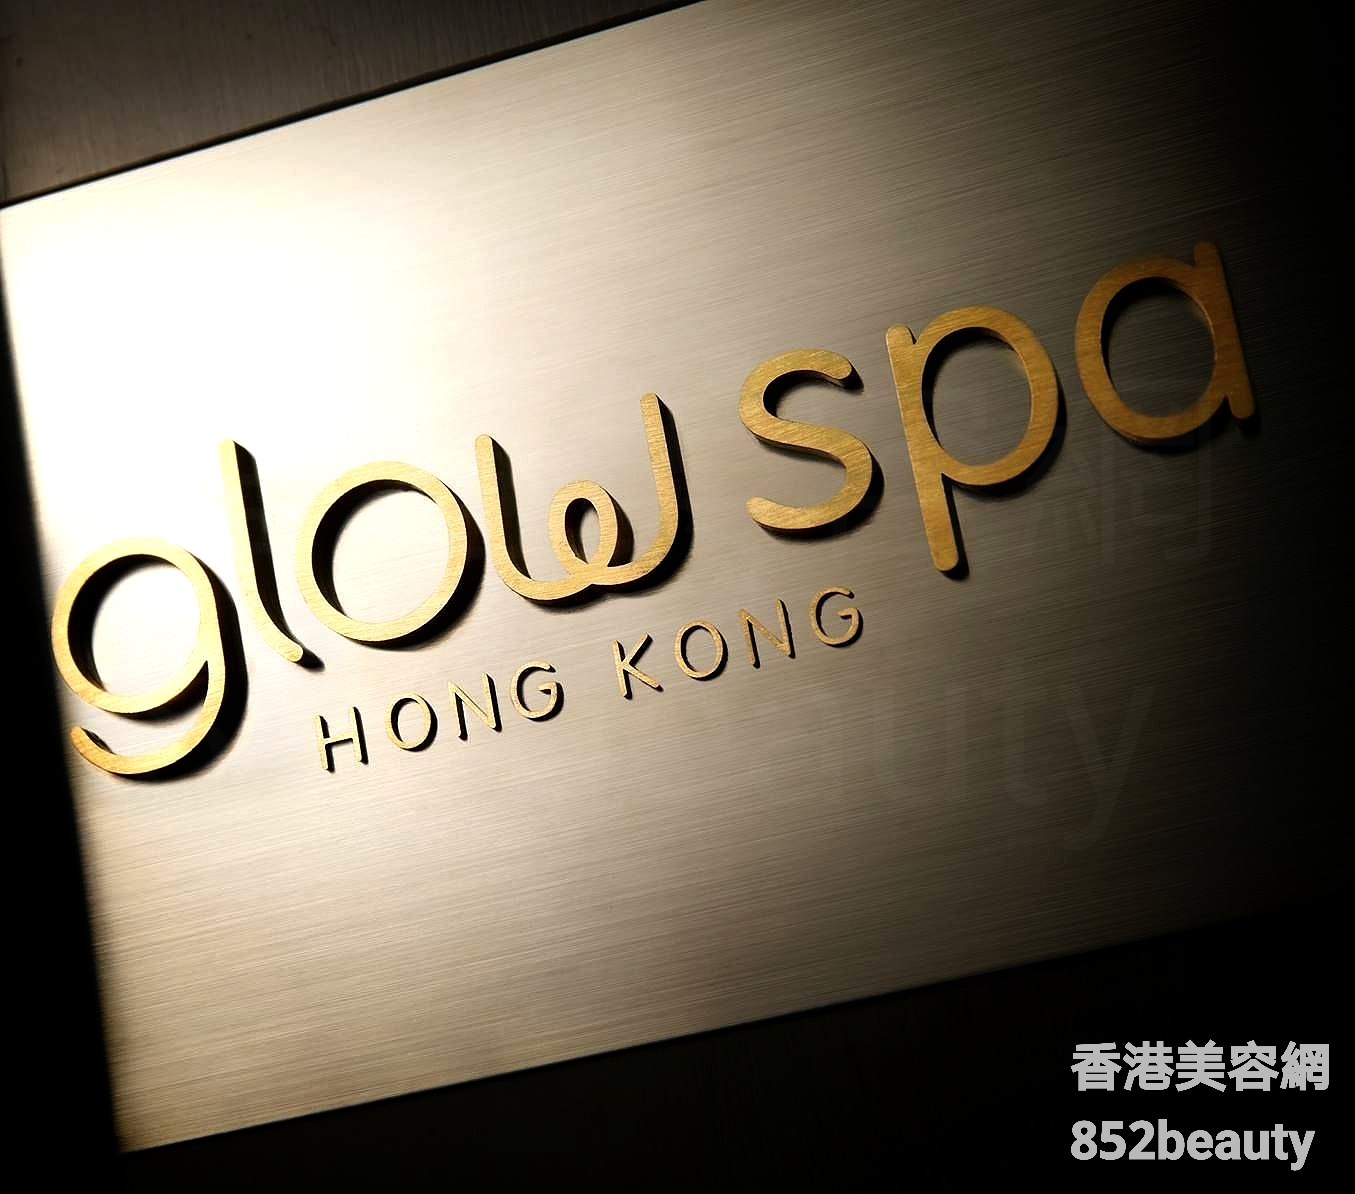 Hair Removal: Glow Spa